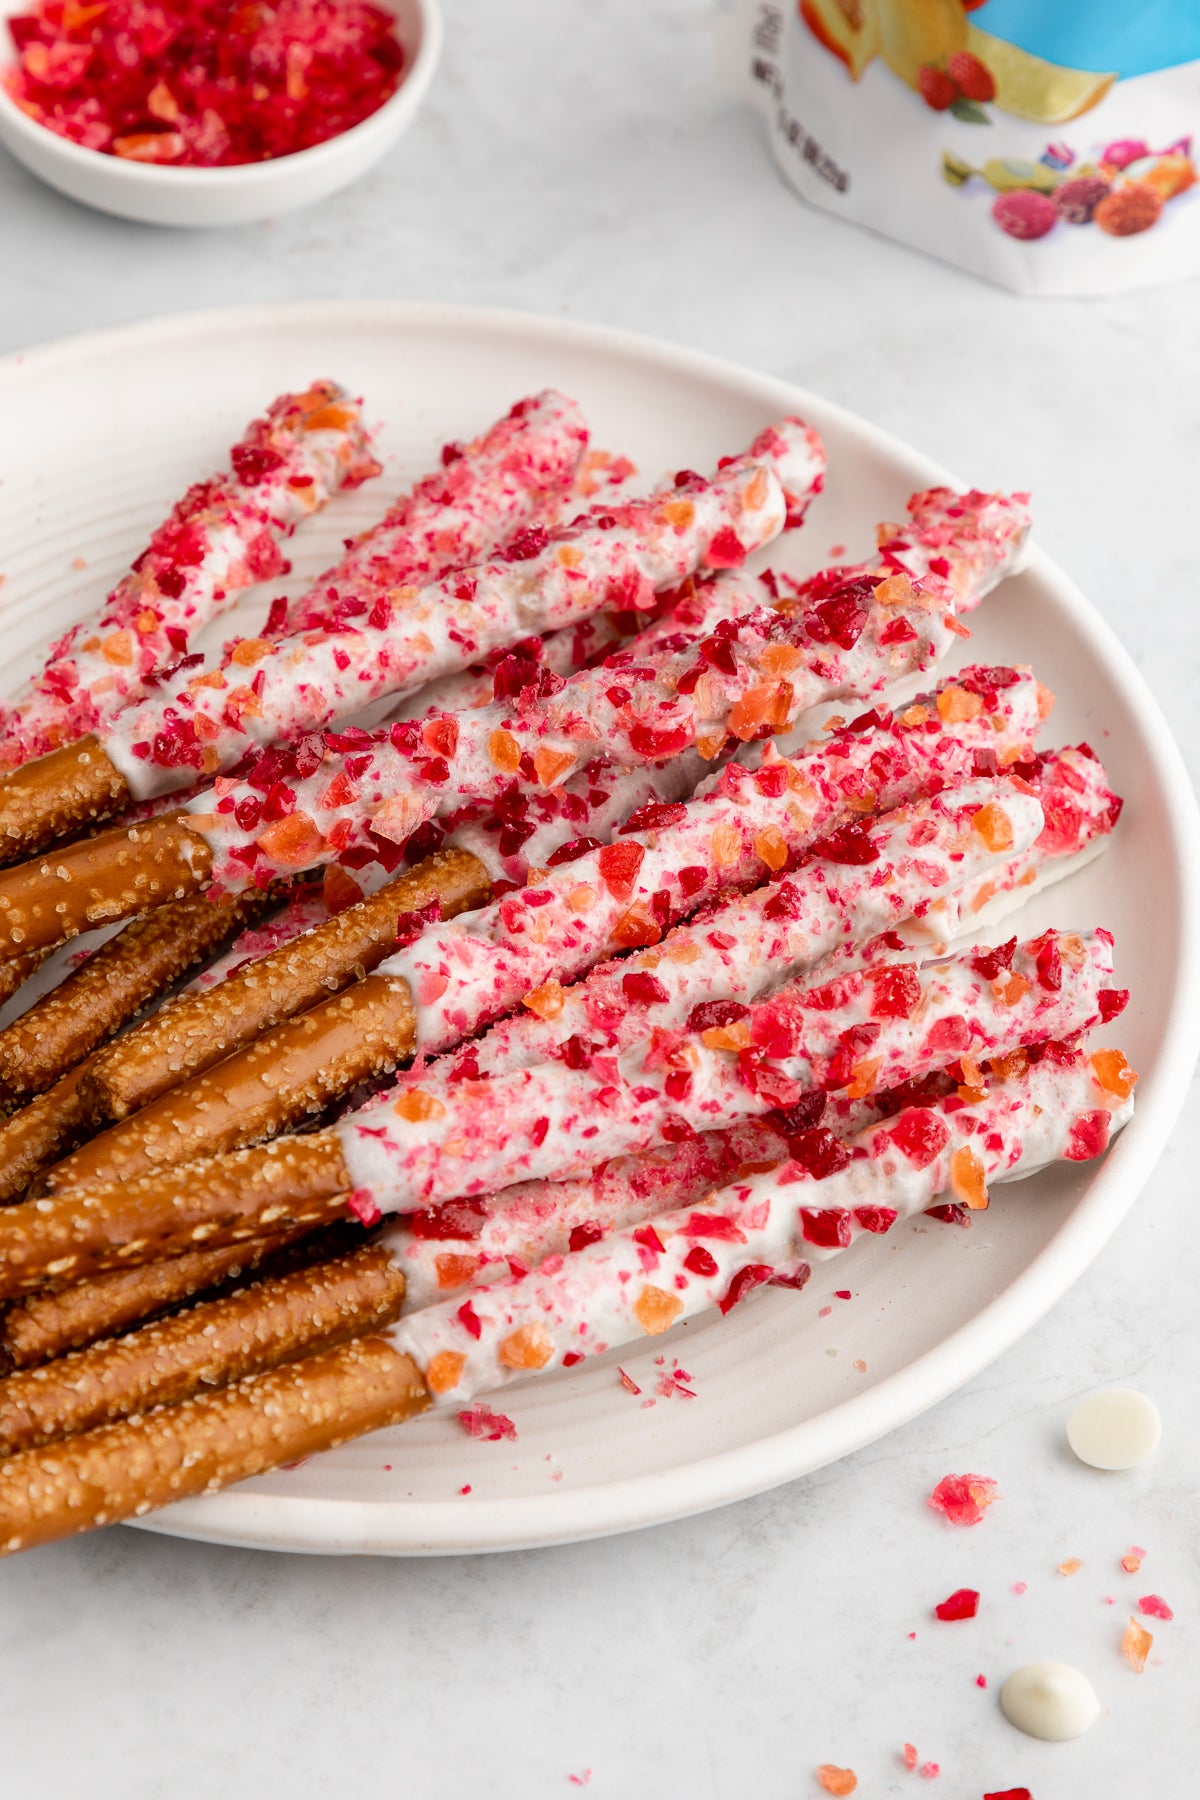 White Chocolate Covered Pretzel Rods on a plate next to a bag of Assorted Organic Hard Candy